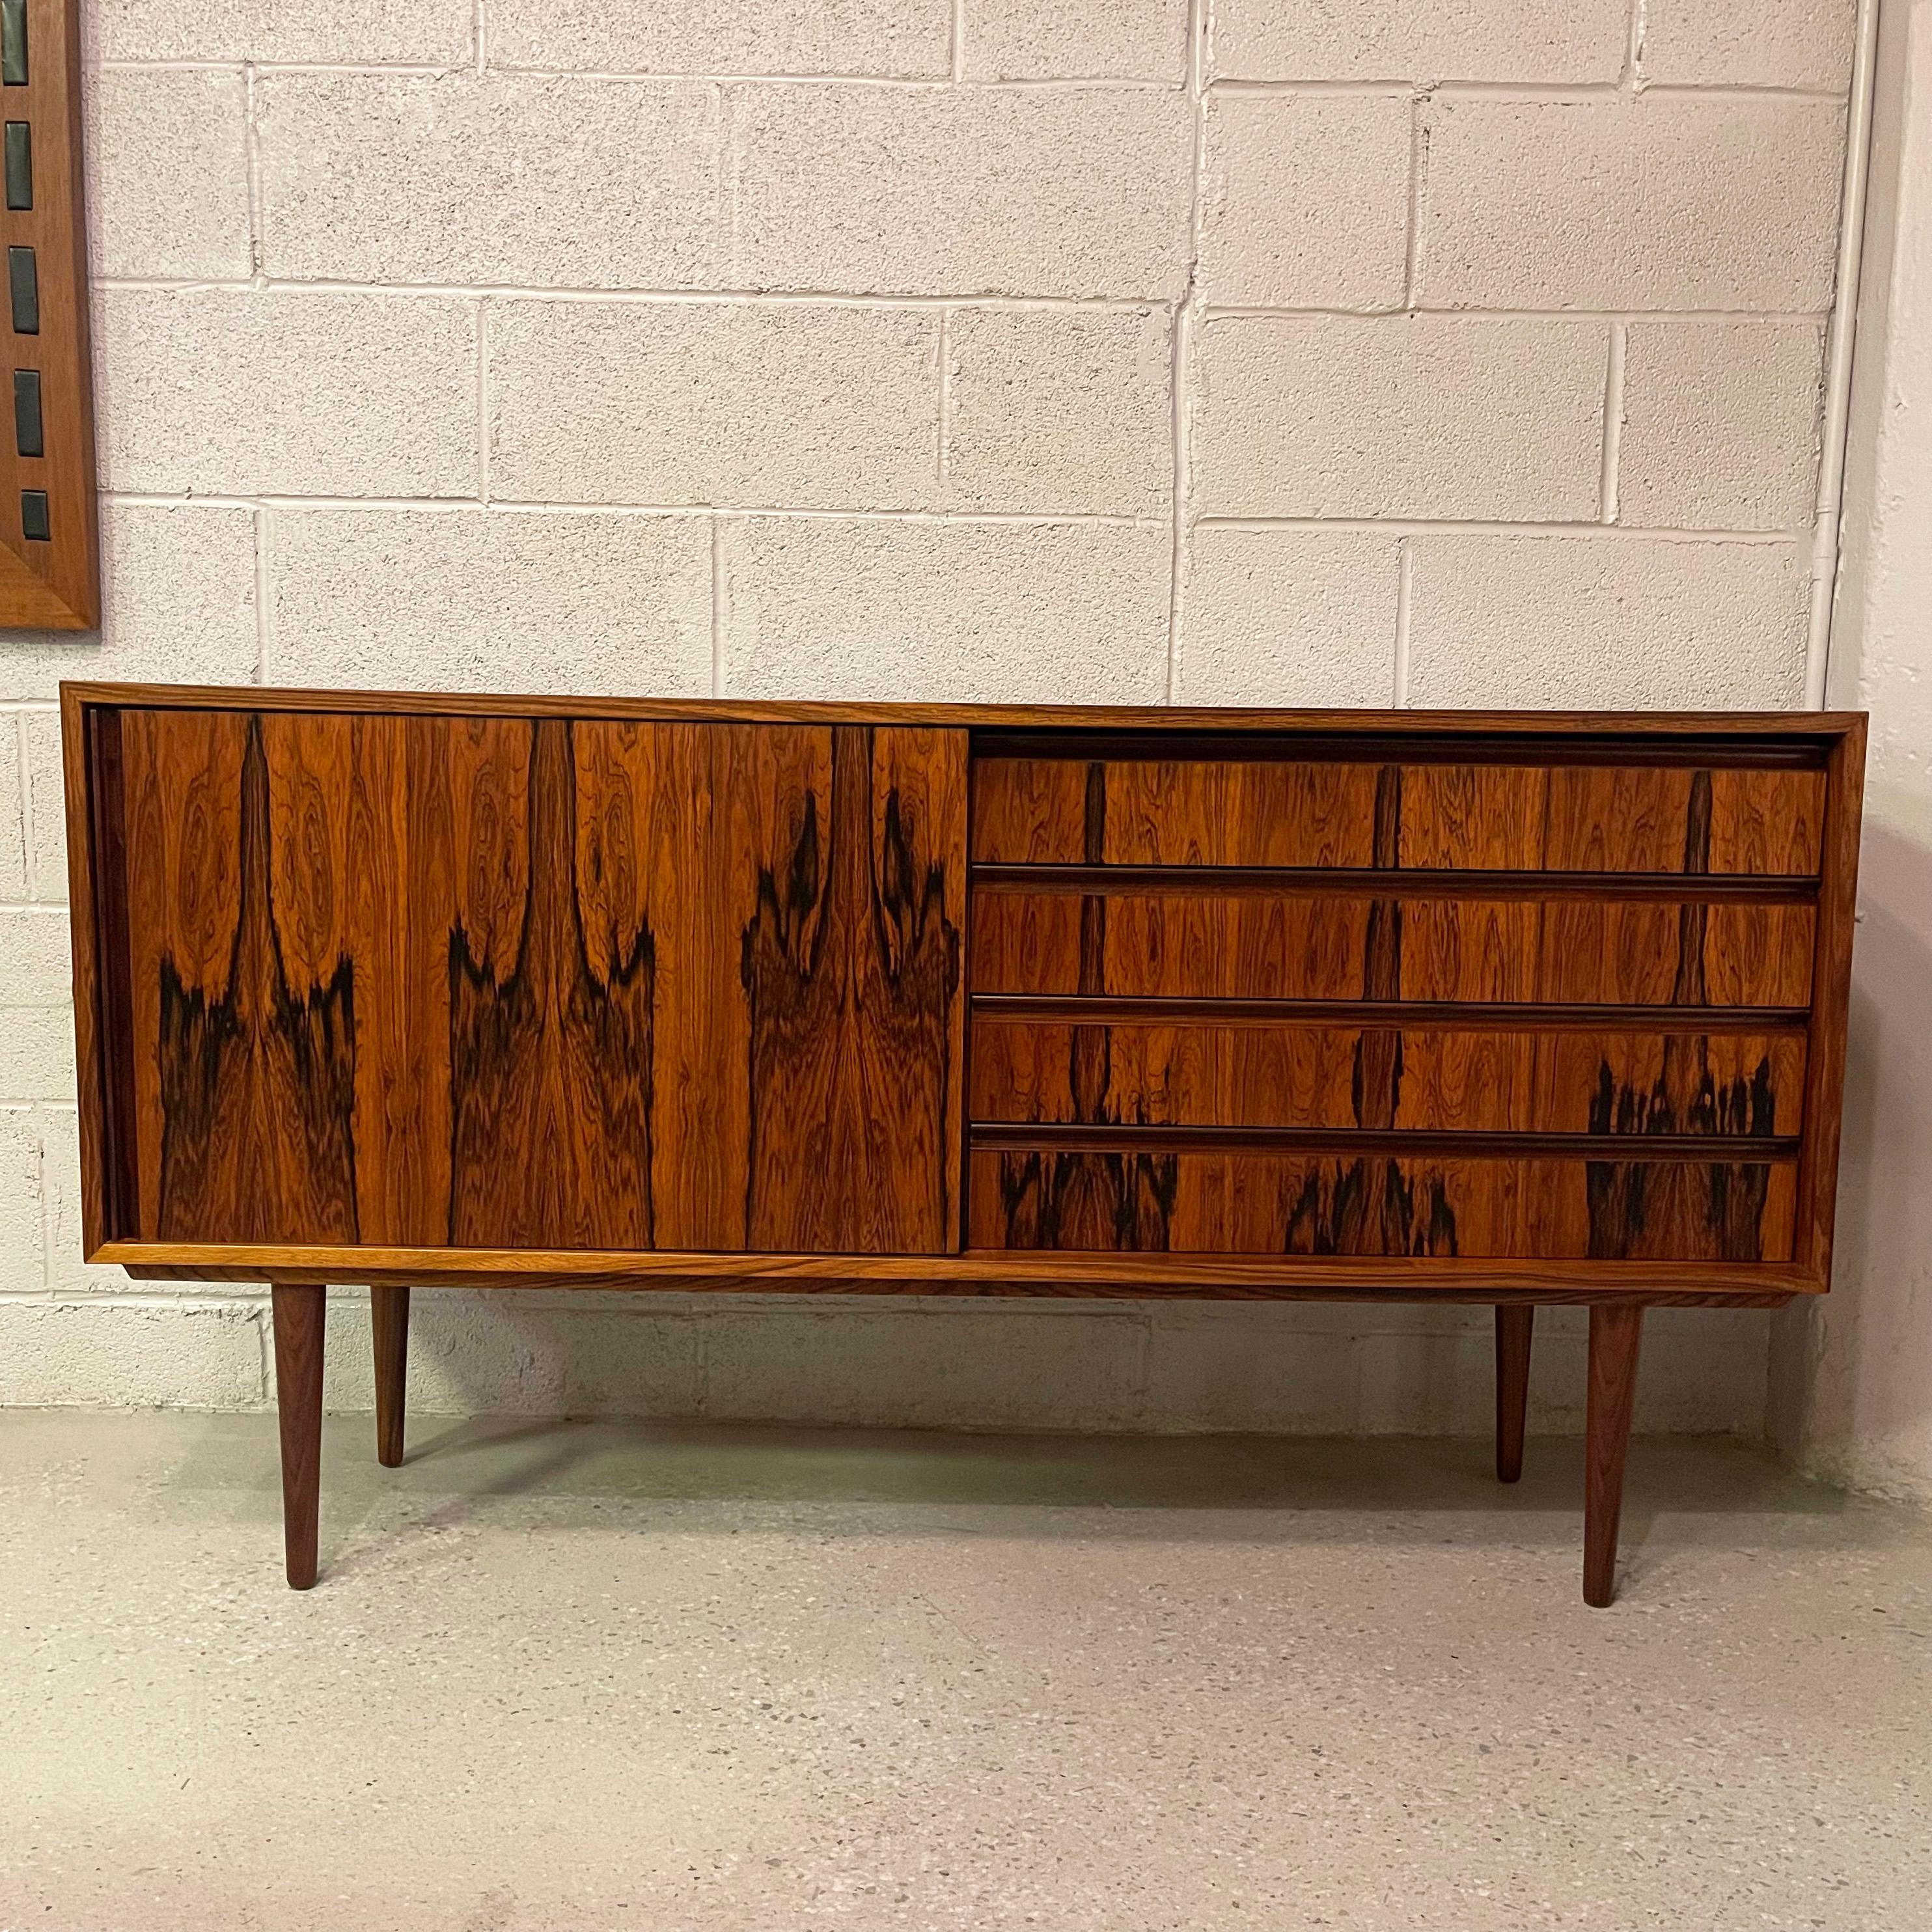 Streamlined, Scandinavian modern, Brazilian rosewood credenza features a gorgeous grain with sliding door on one side and drawers on the other. It's small size at 55.5 inches wide x 15.75 inches deep makes it the perfect apartment size, mid-century